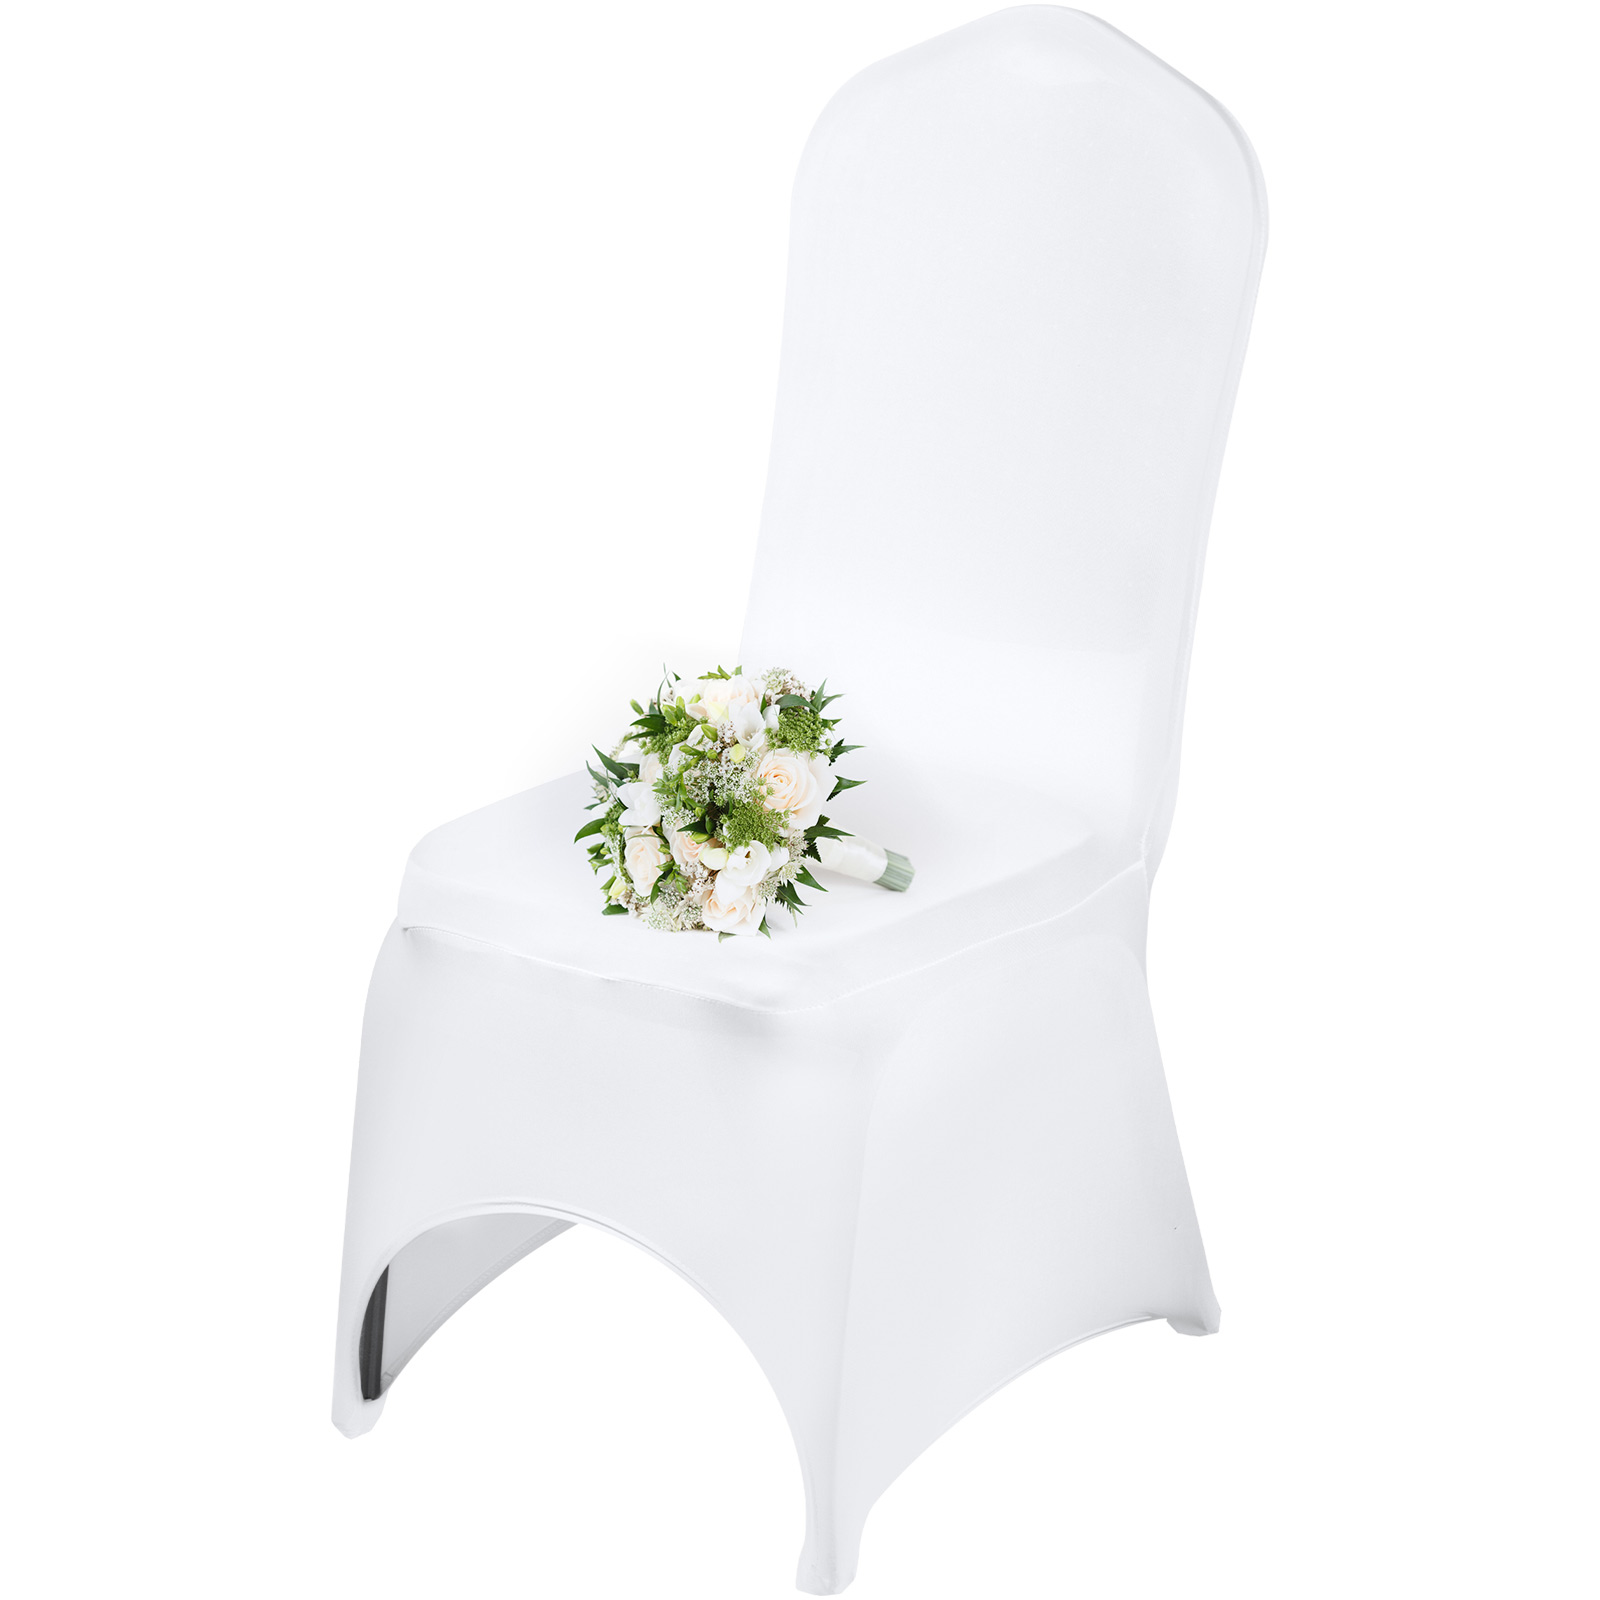 50pcs Stretch Spandex White Chair Covers Wedding Party Arched Front 50 Slipcover от Vevor Many GEOs